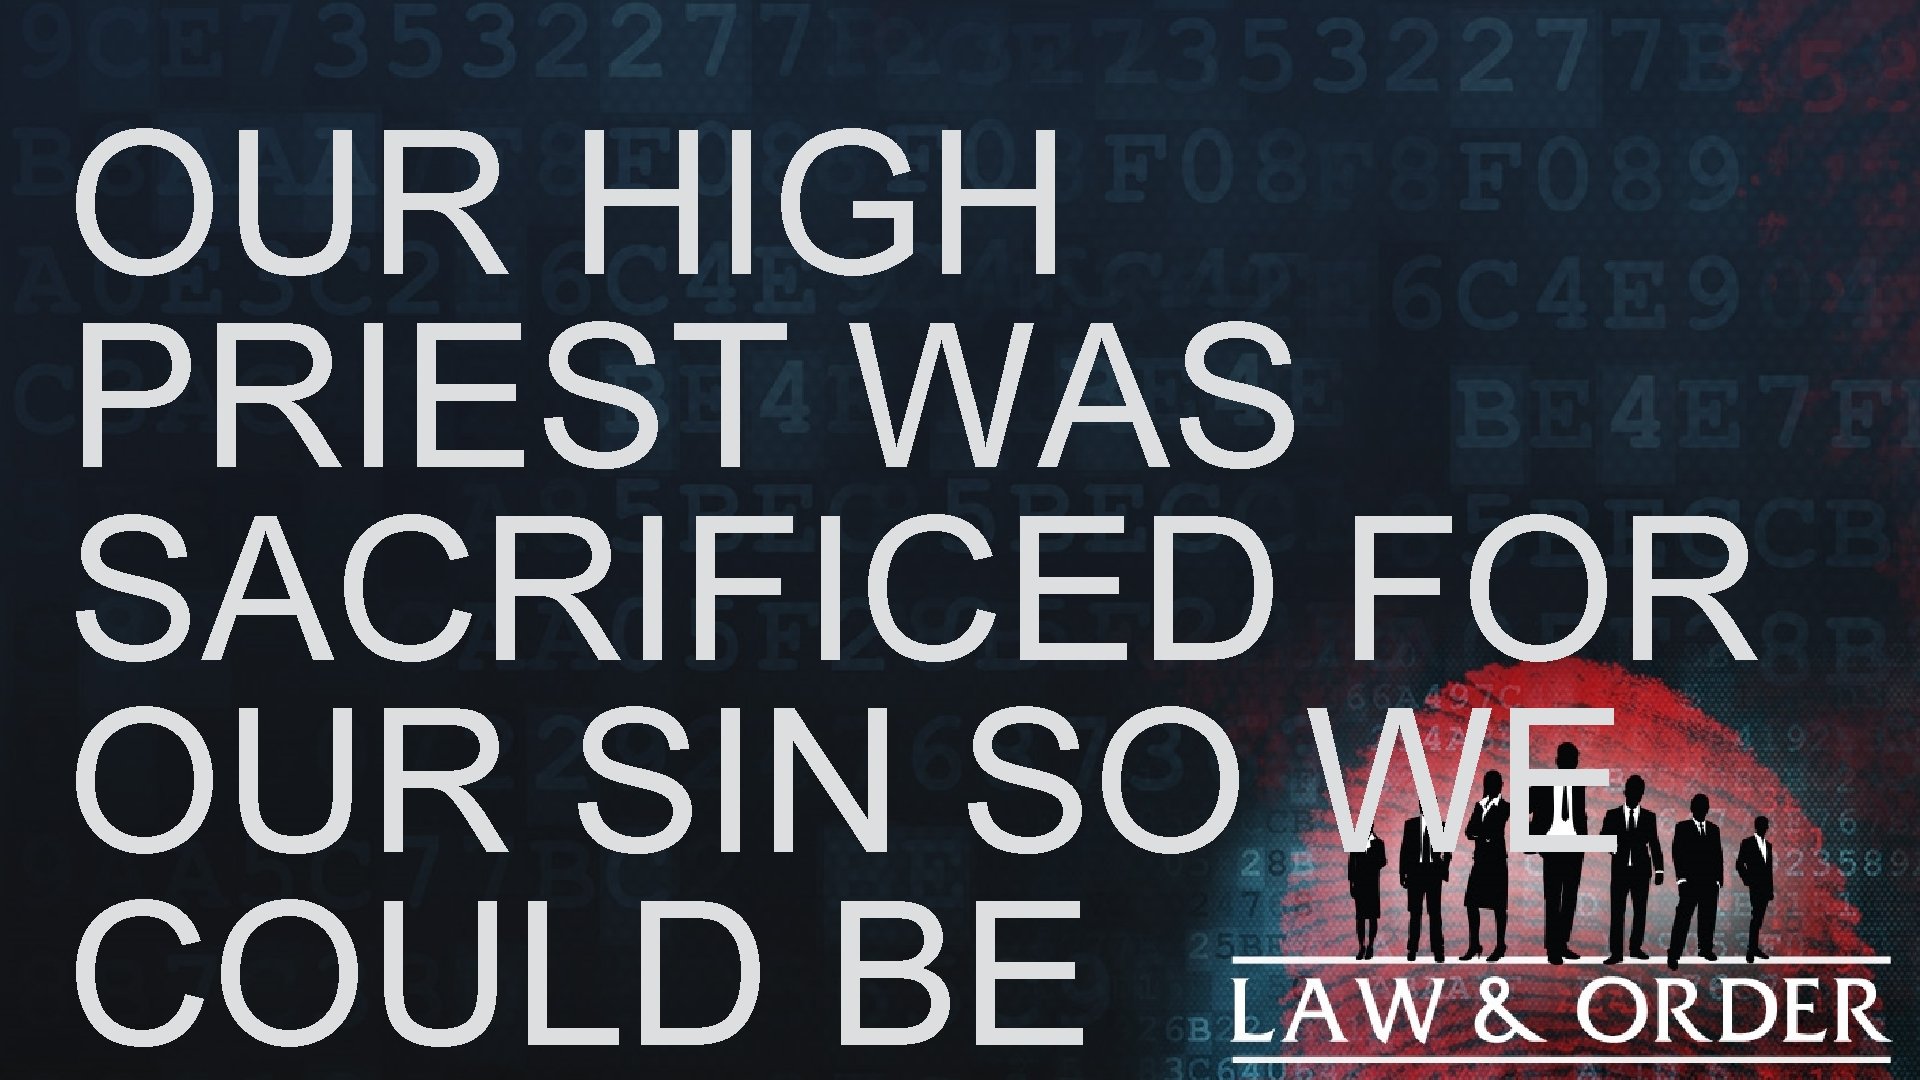 OUR HIGH PRIEST WAS SACRIFICED FOR OUR SIN SO WE COULD BE 